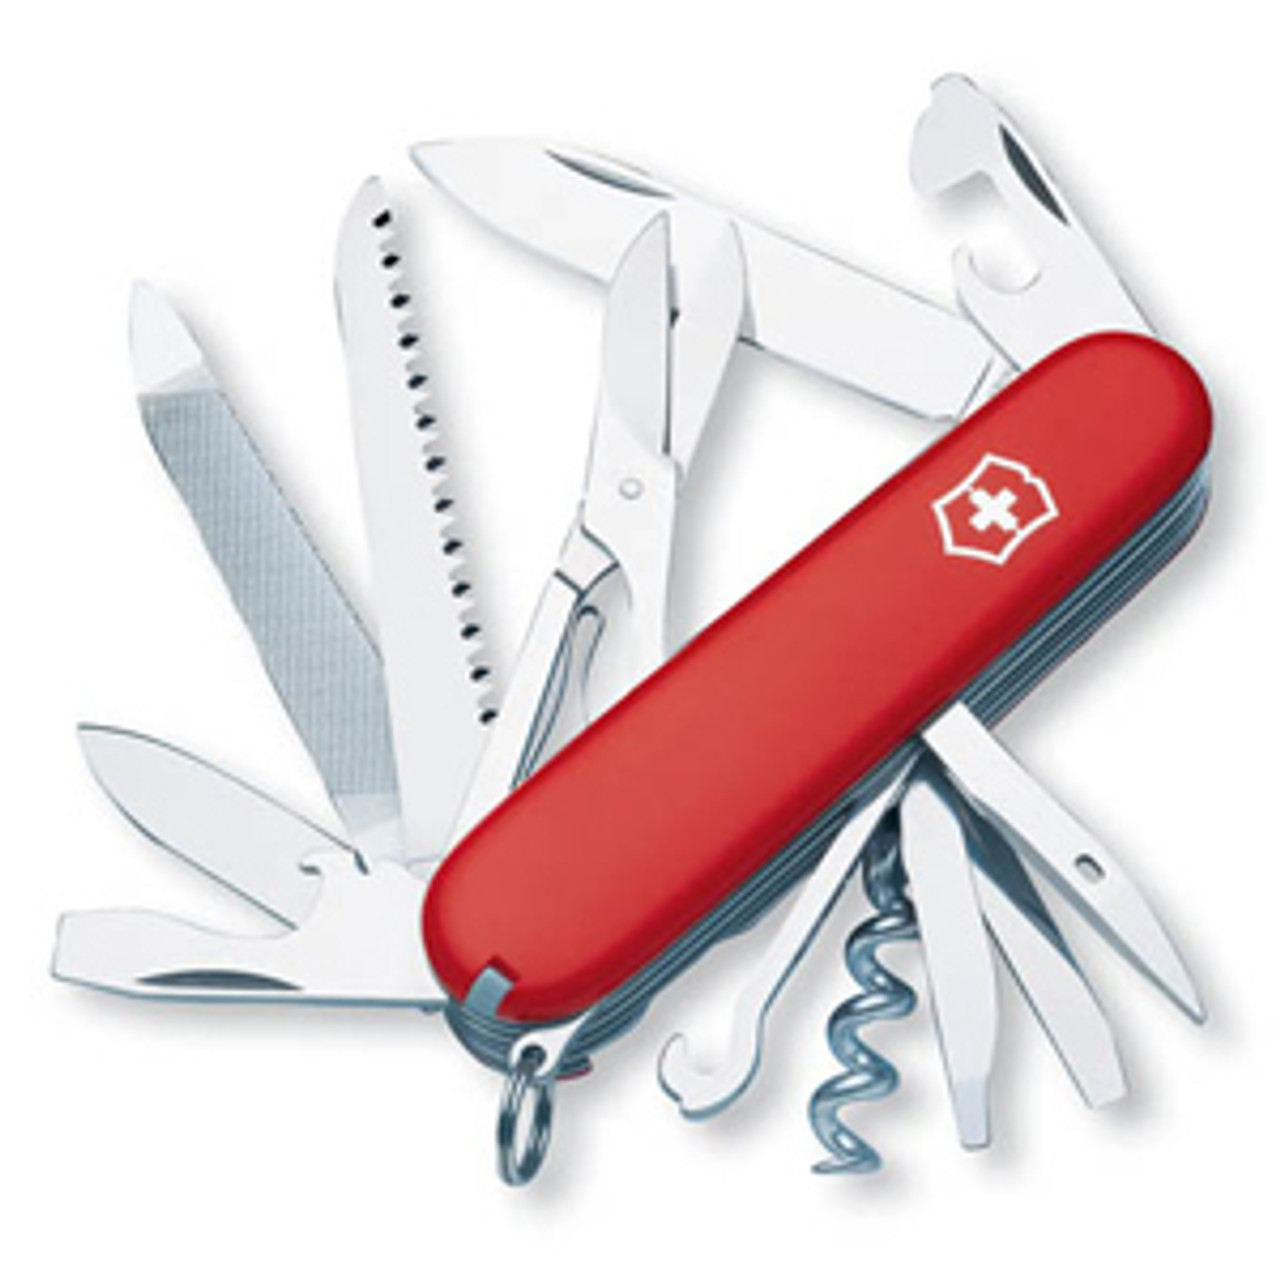 Victorinox Swiss Army Classic Pillow Serrated Peeler - Red, 1 ct